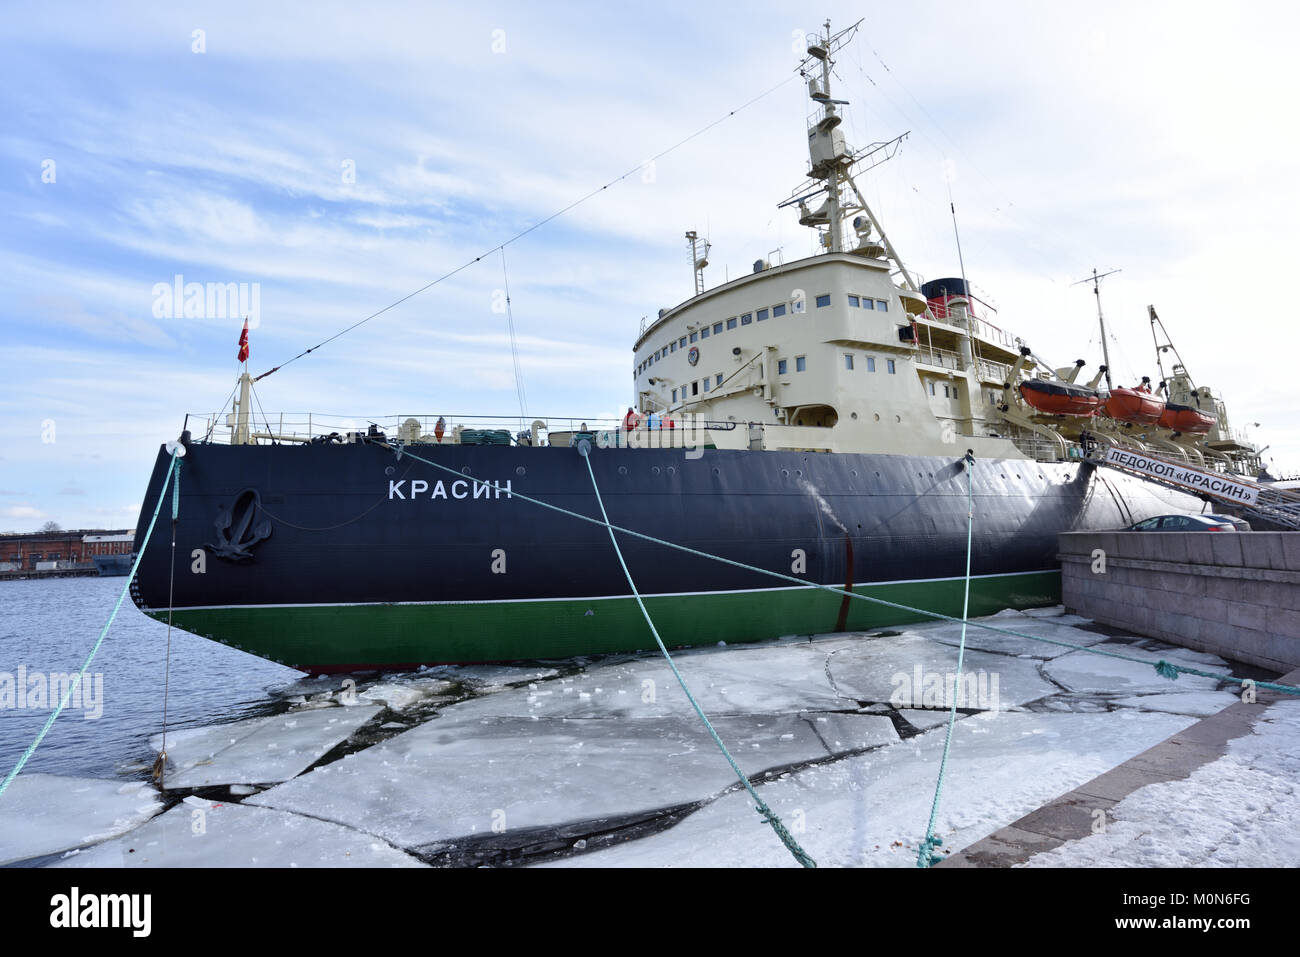 St. Petersburg, Russia - March 6, 2015:Museum ship icebreaker Krasin anchored in Saint Petersburg. Built in 1917, it become famous in 1928 during the  Stock Photo